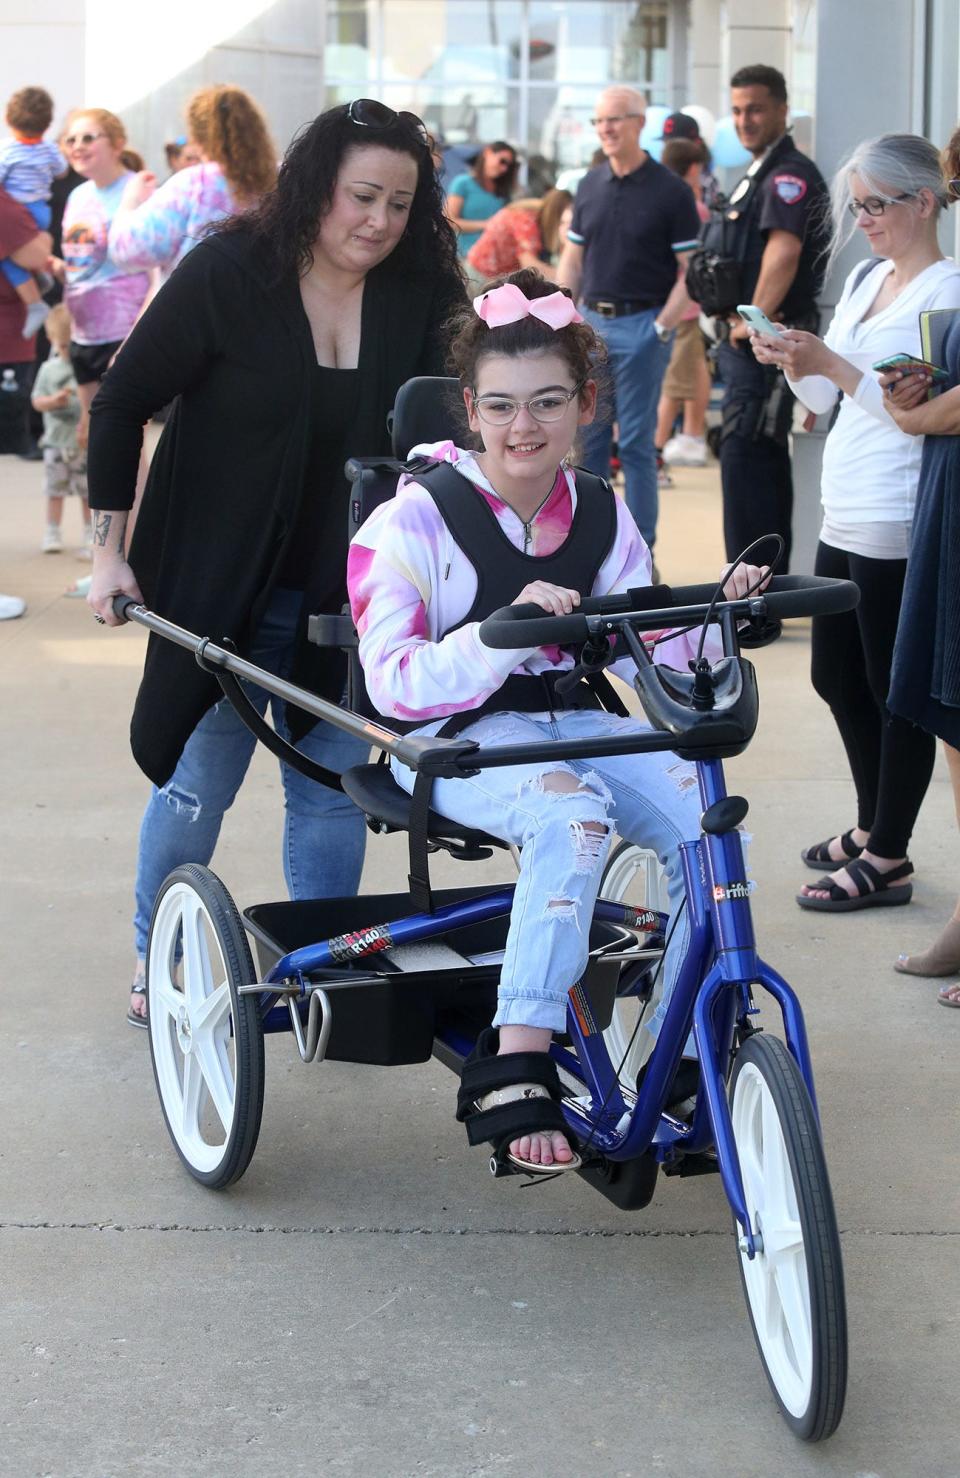 Bre McClure, left, helps her daughter Miah, 15, with her new adaptive tricycle that was presented this week to the Hoover High student at Cain Toyota-BMW in Jackson Township.